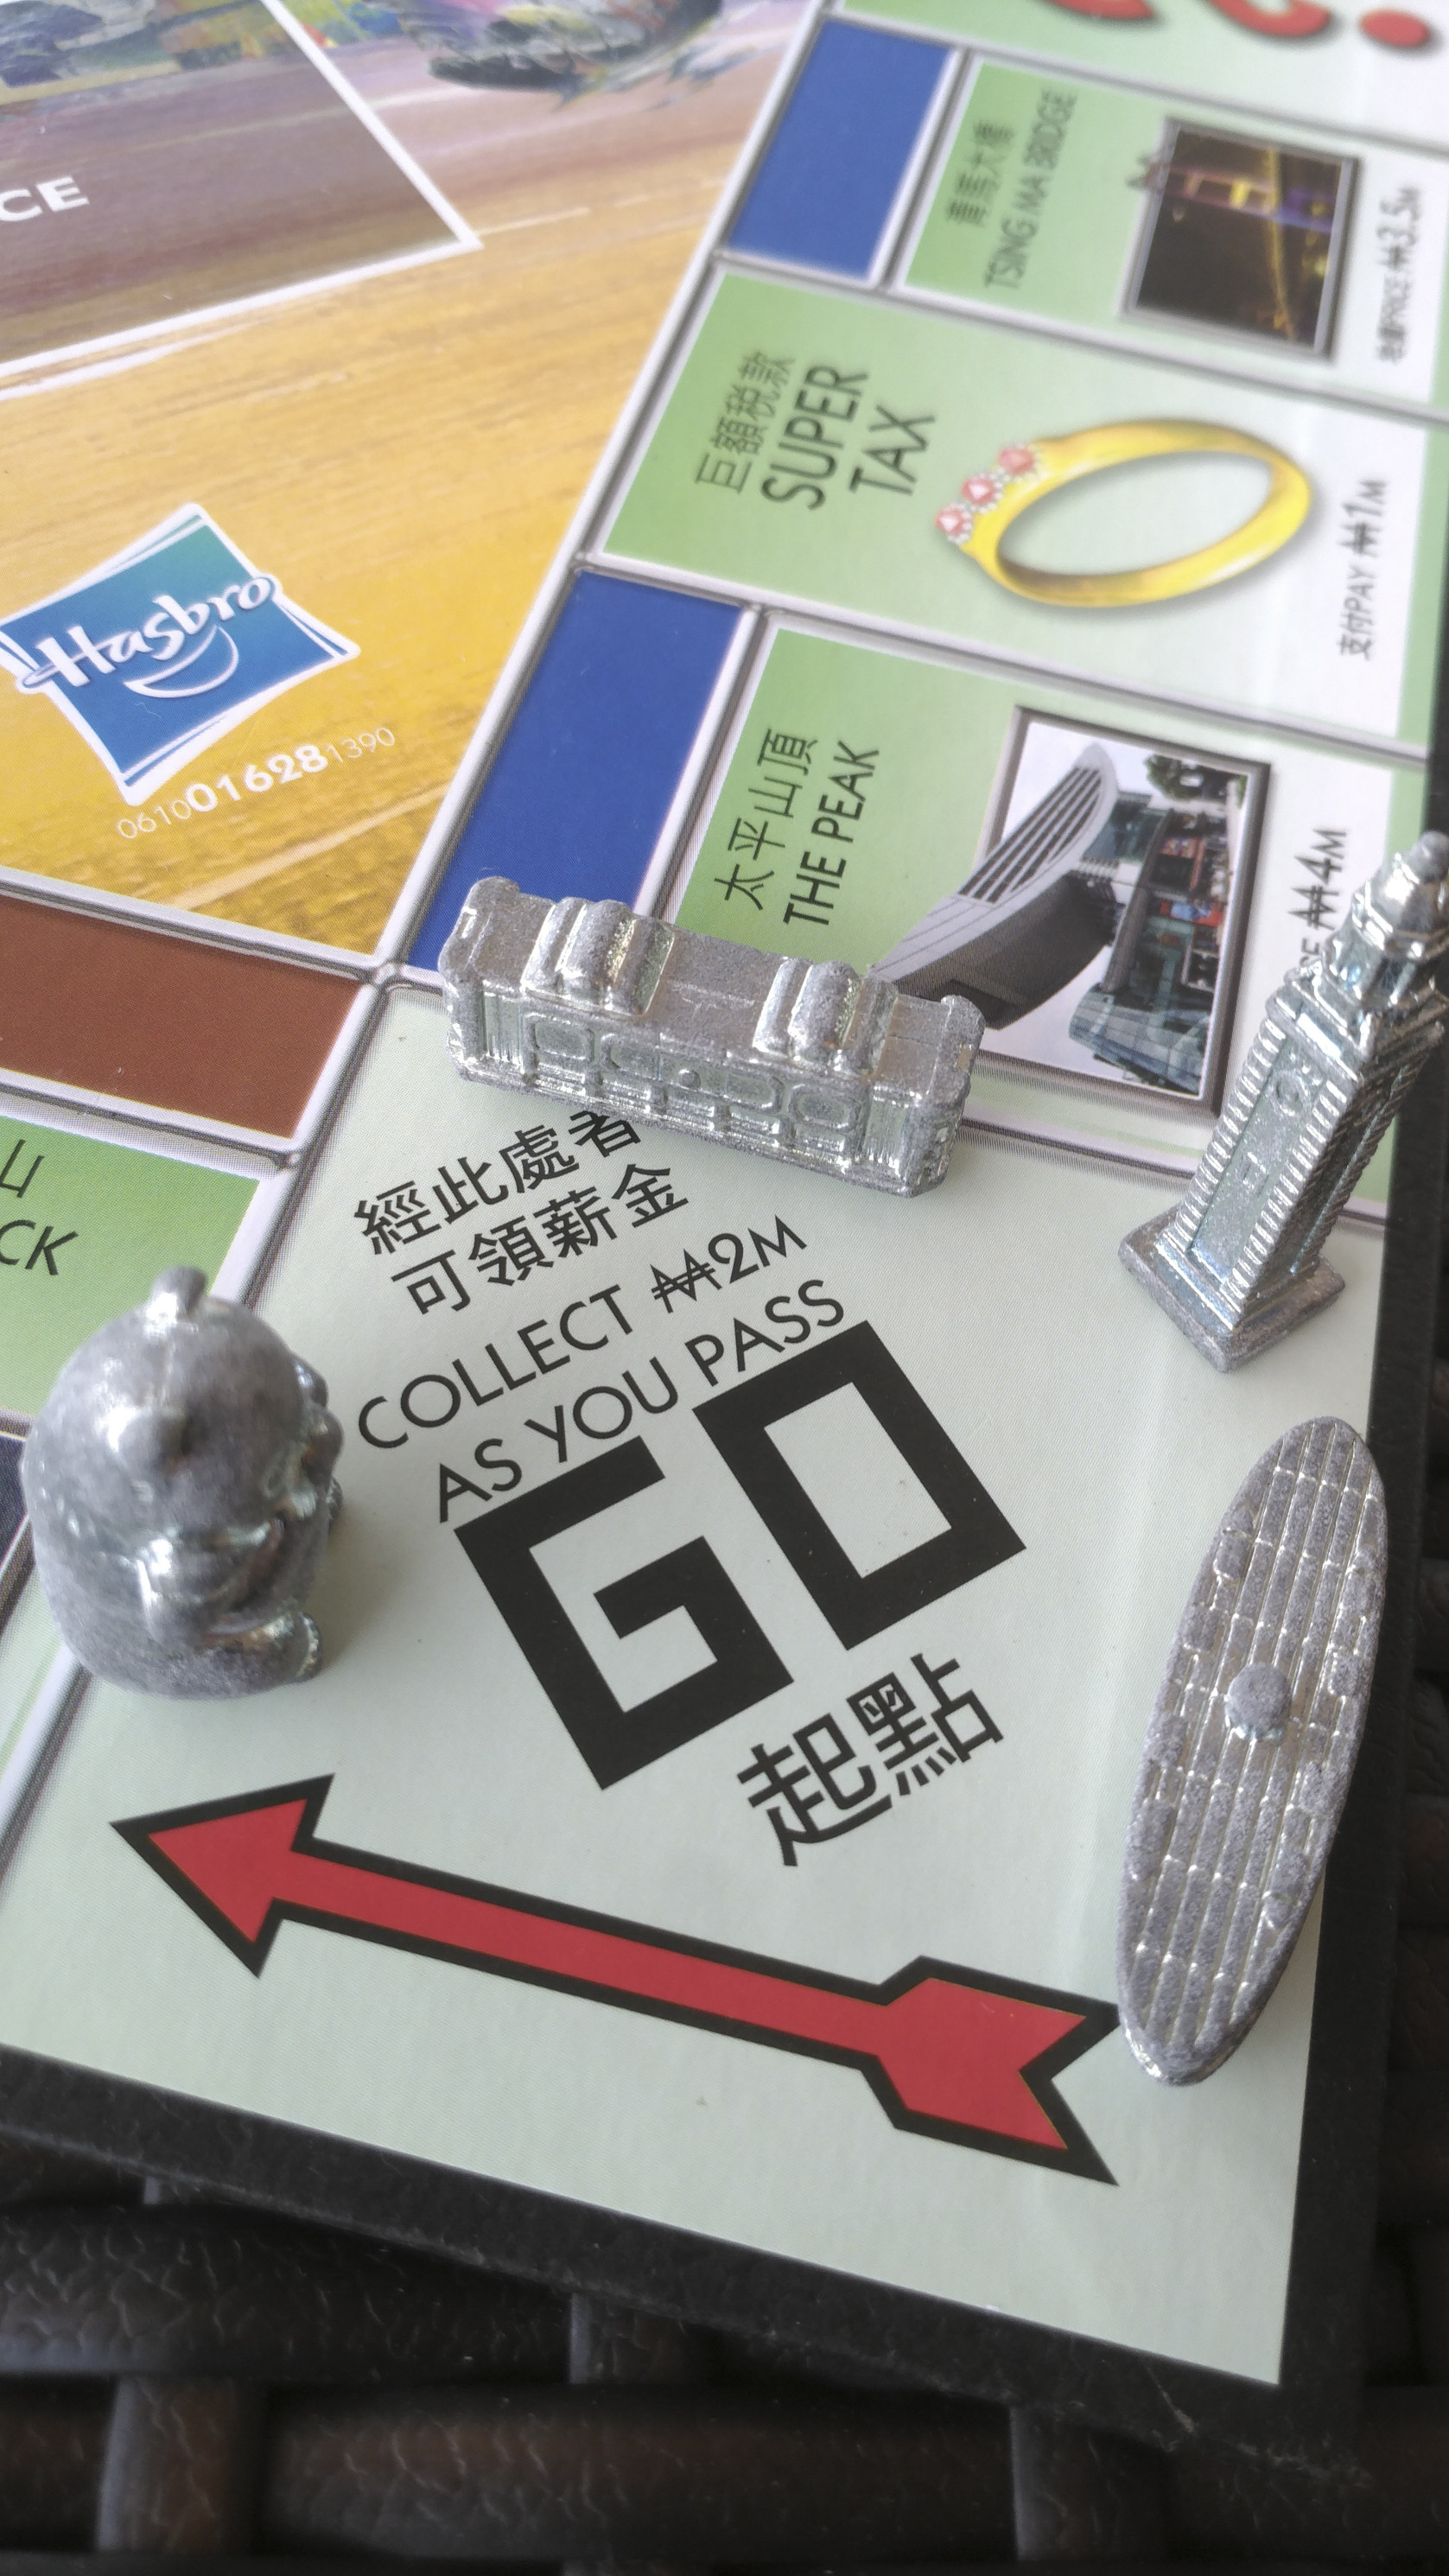 The Monopoly - Hong Kong Attractions edition board’s starting point hasn’t changed, but the amount of Monopoly money you get each time you pass go certainly has. Photo: Ed Peters